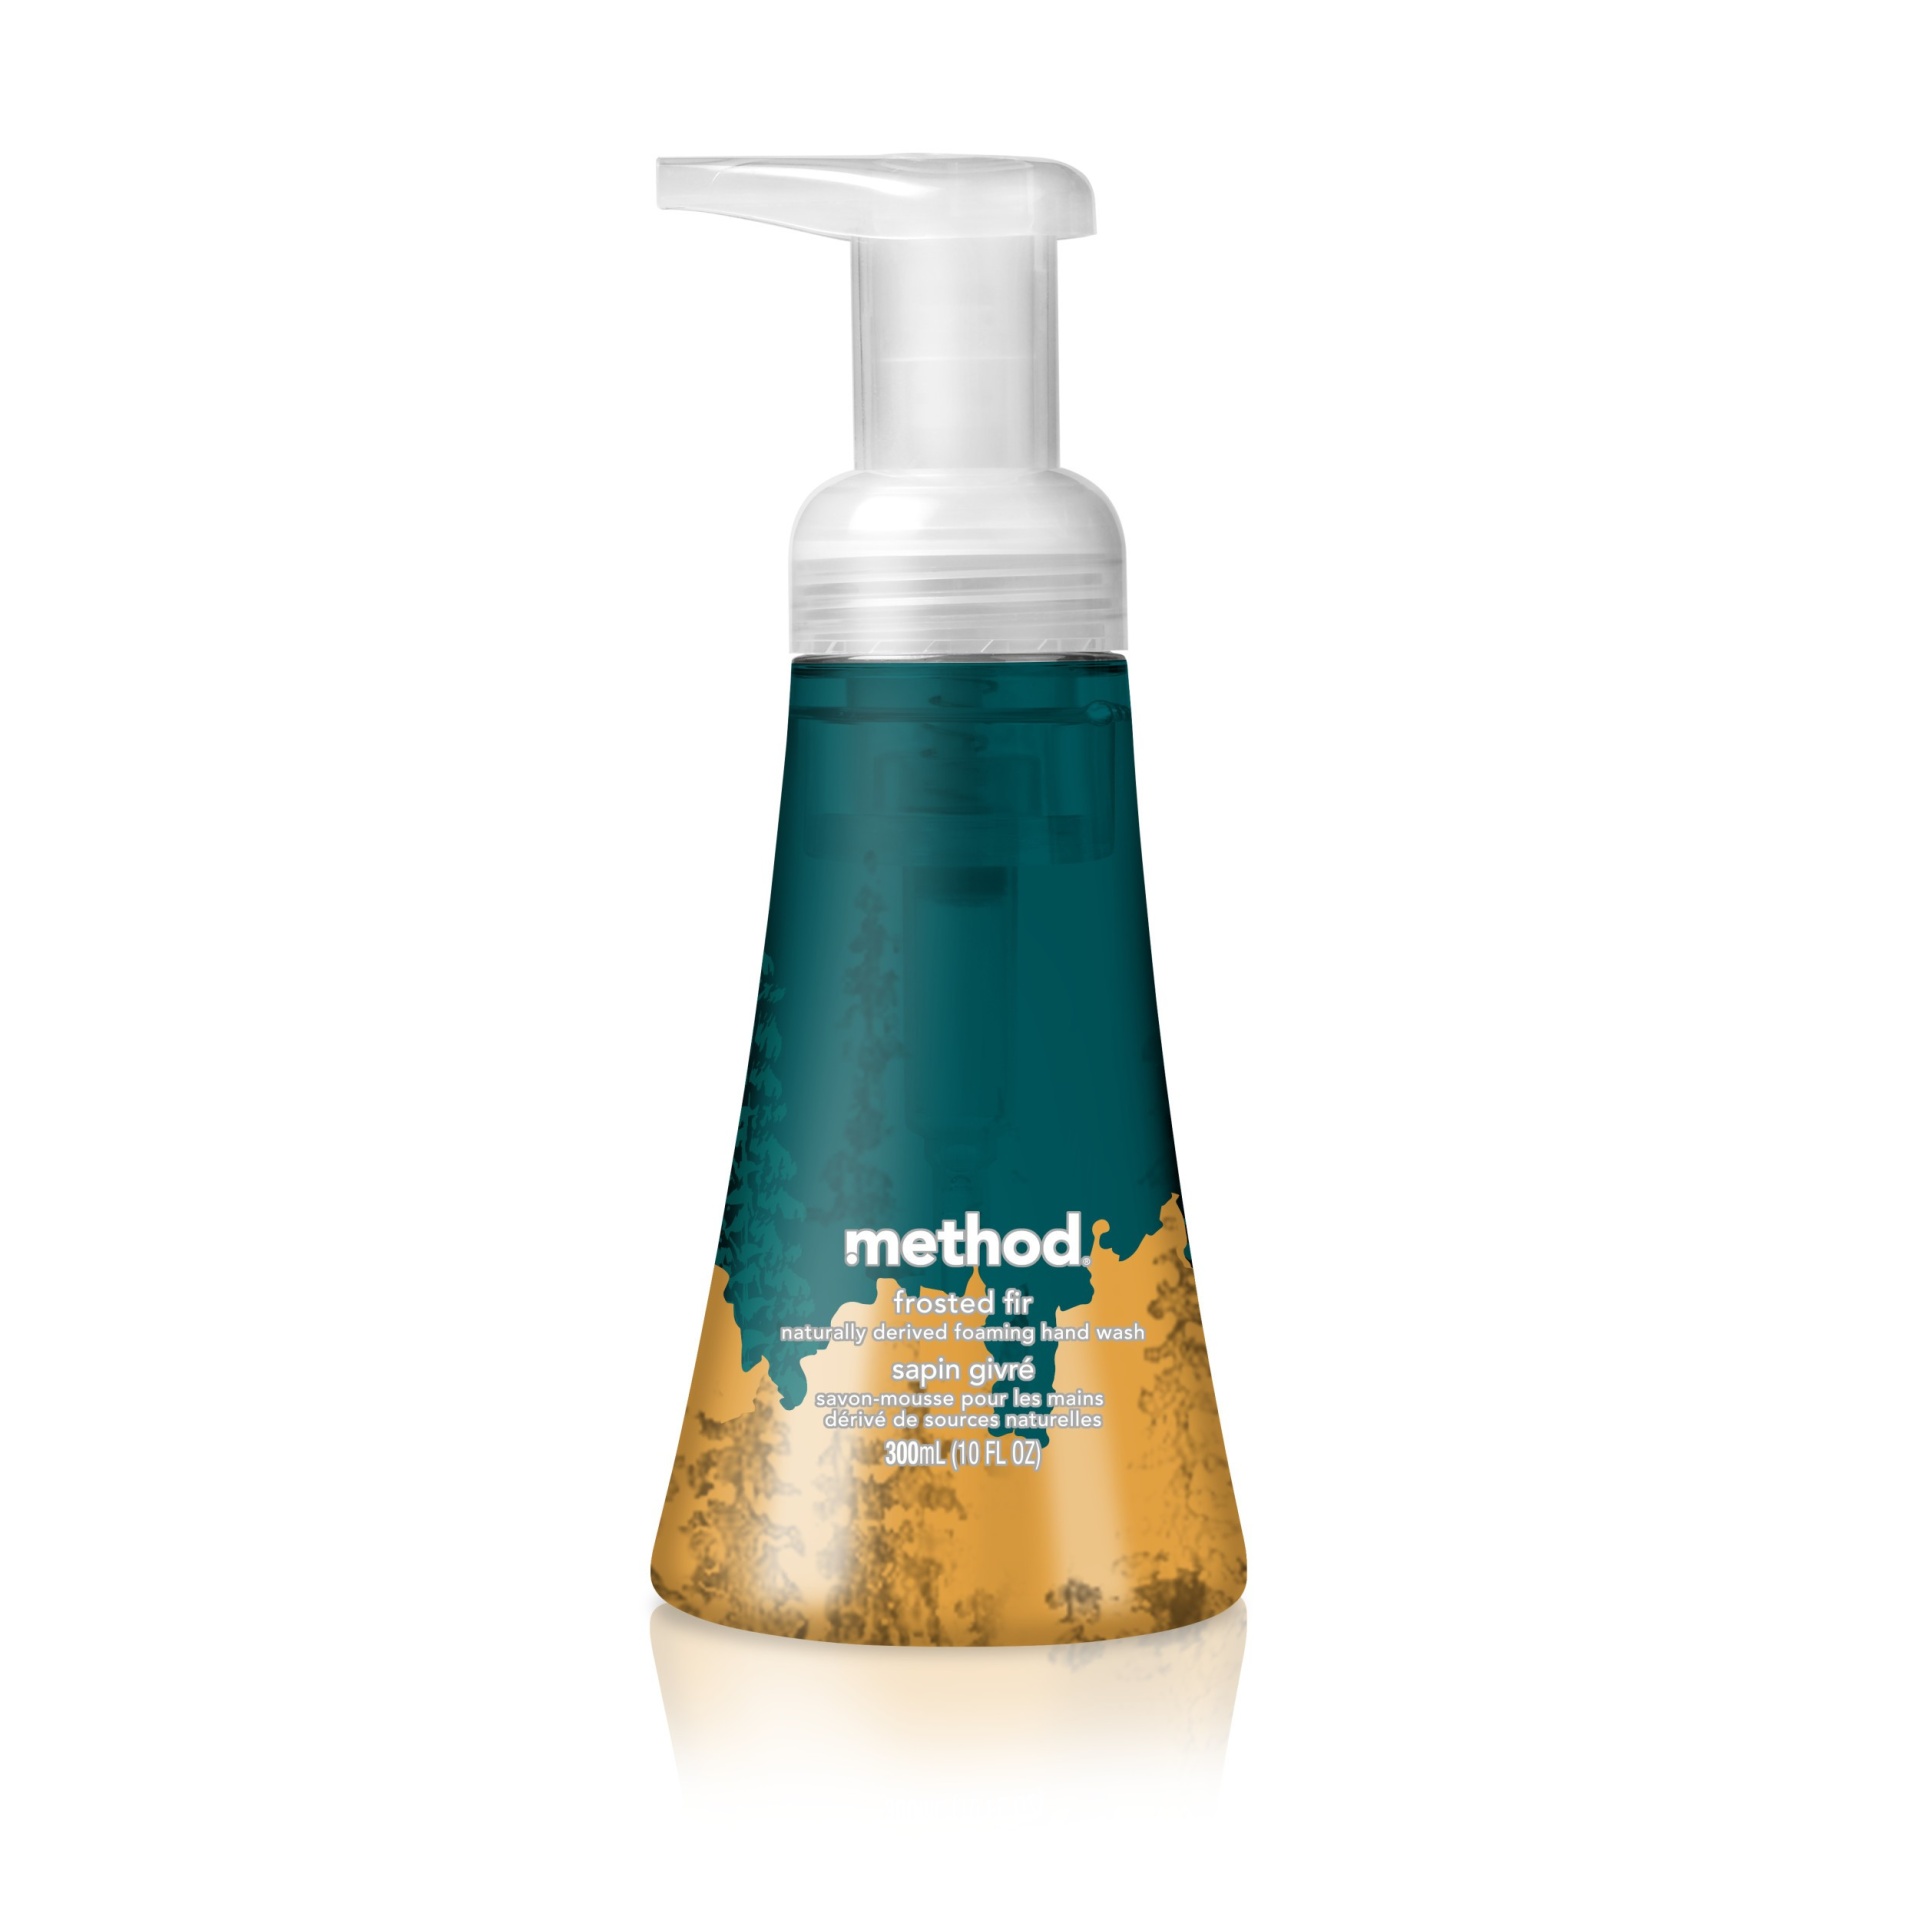 slide 1 of 1, method Frosted Fir Holiday Liquid Hand Soap, 10 fl oz